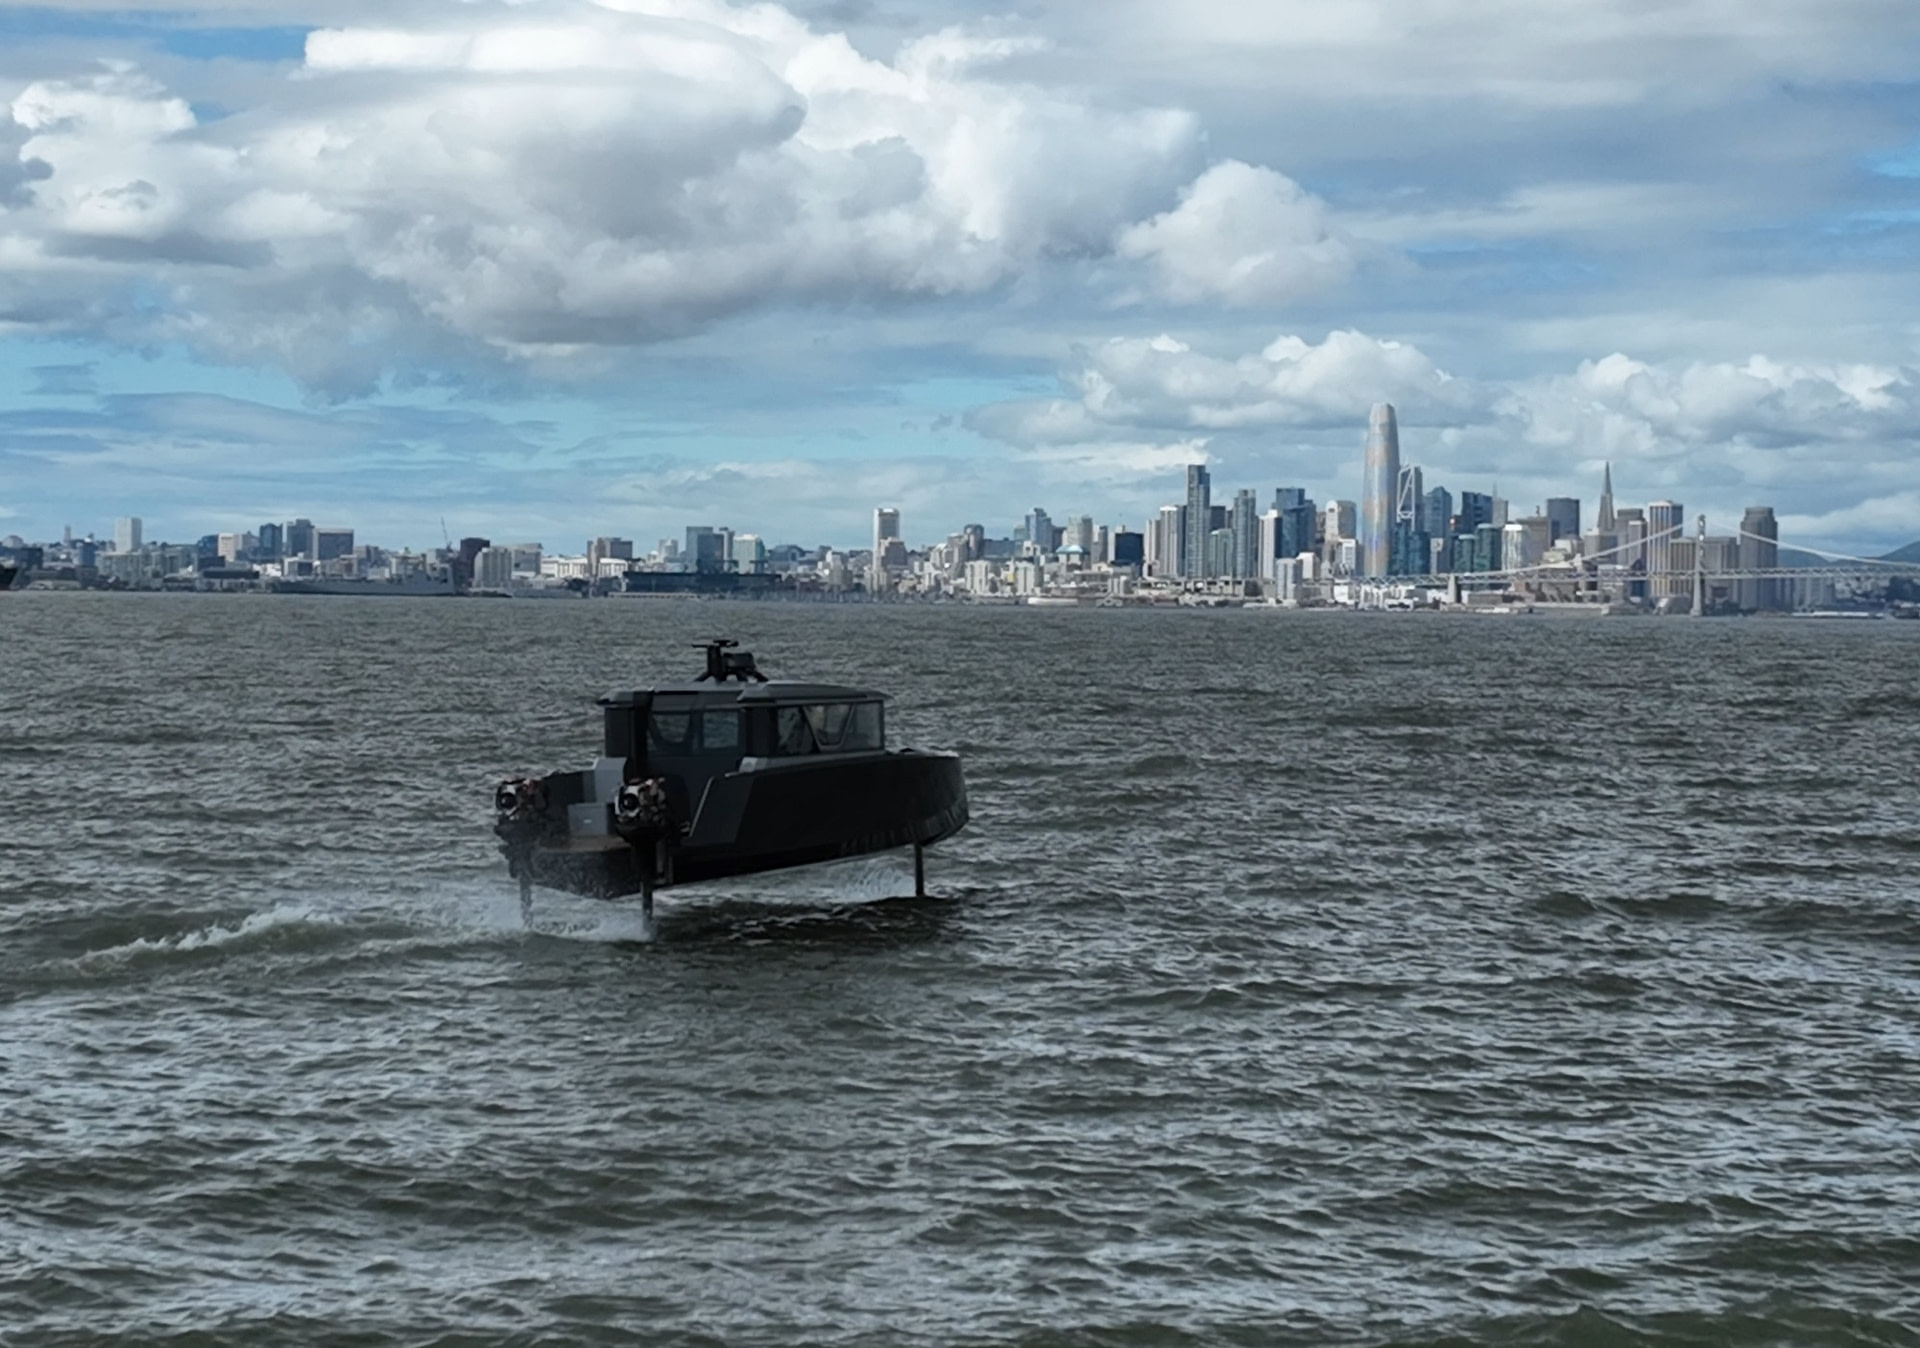 Navier’s hydrofoiling electric cruises west coast waterways to line up first pilot programs